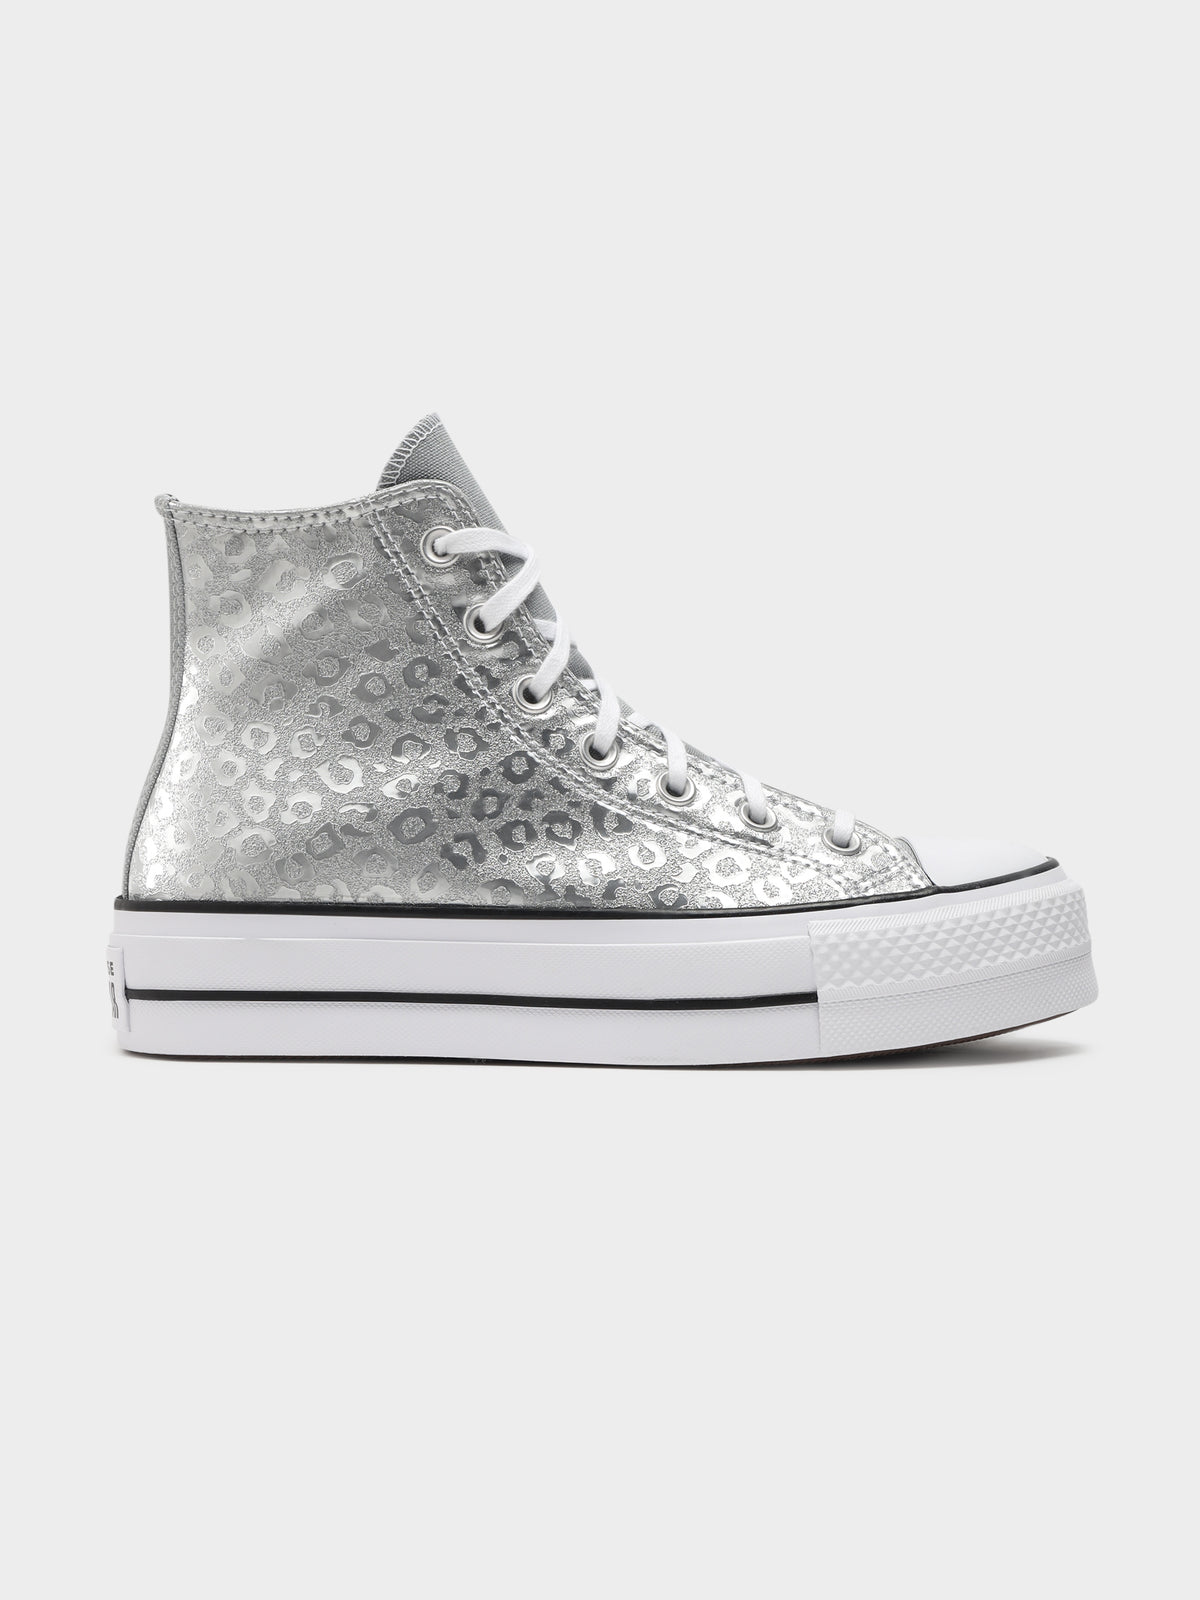 Womens Chuck Taylor All Star in Silver